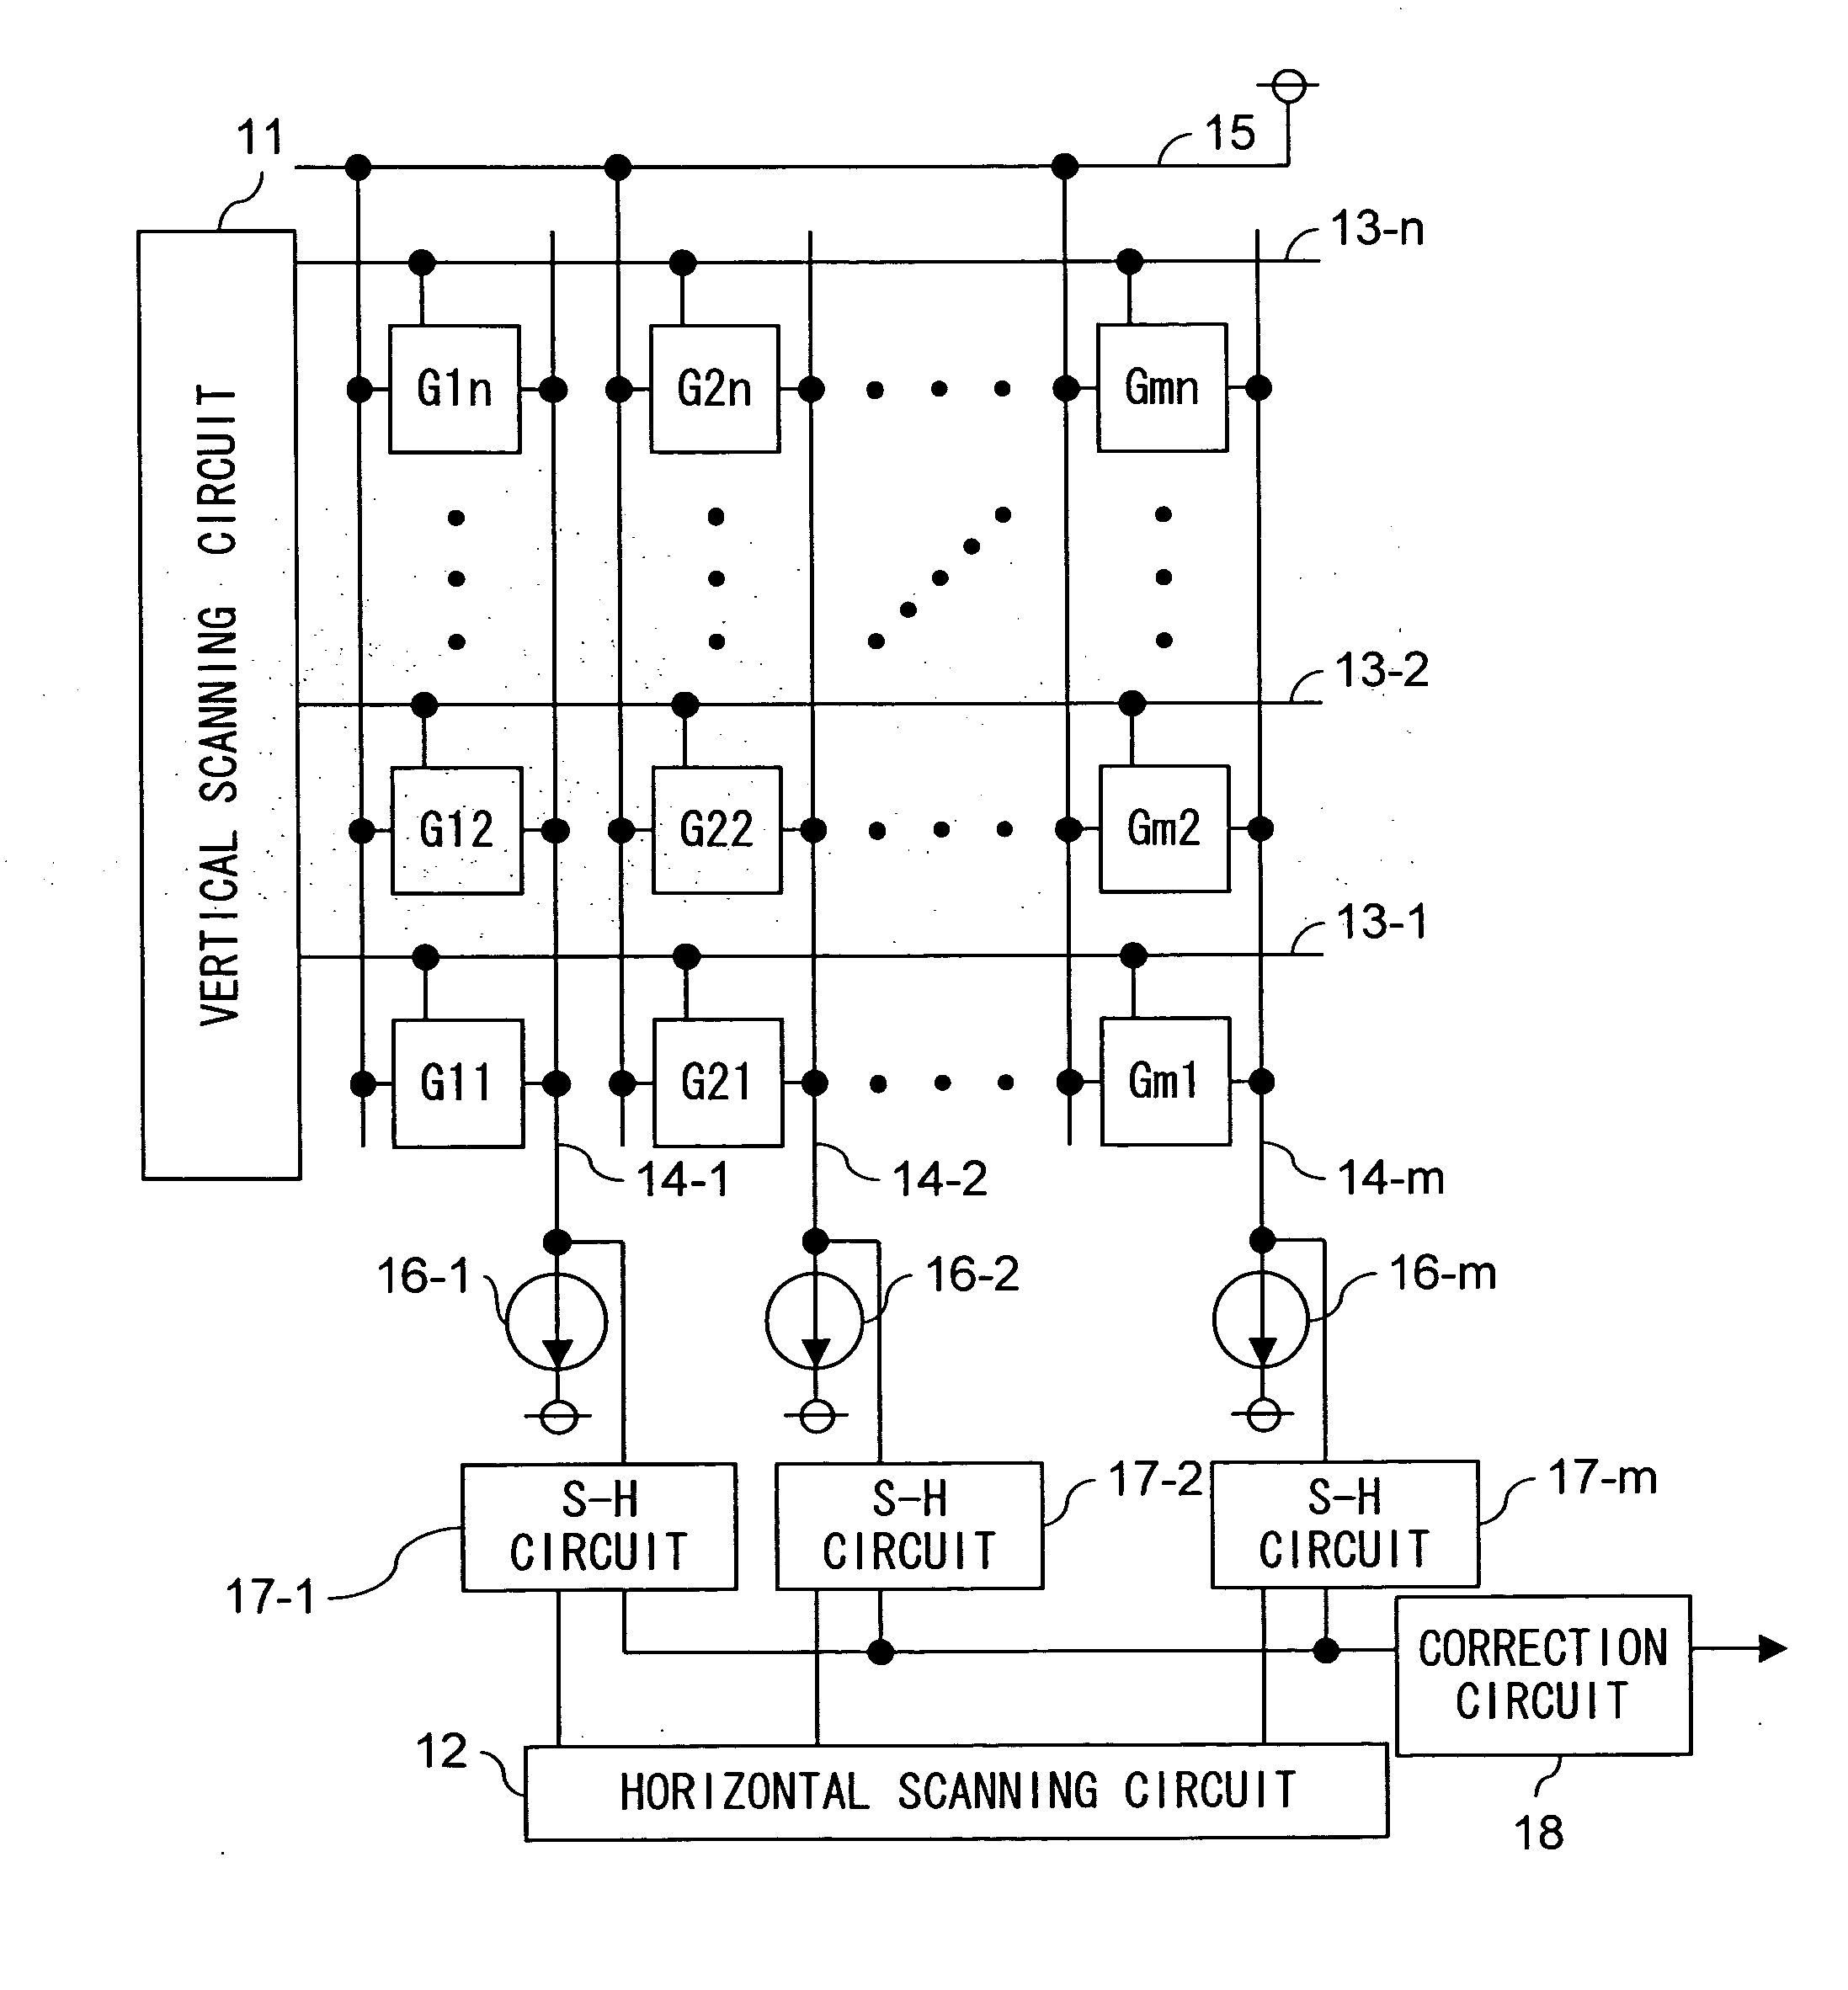 Solid-state image-sensing device